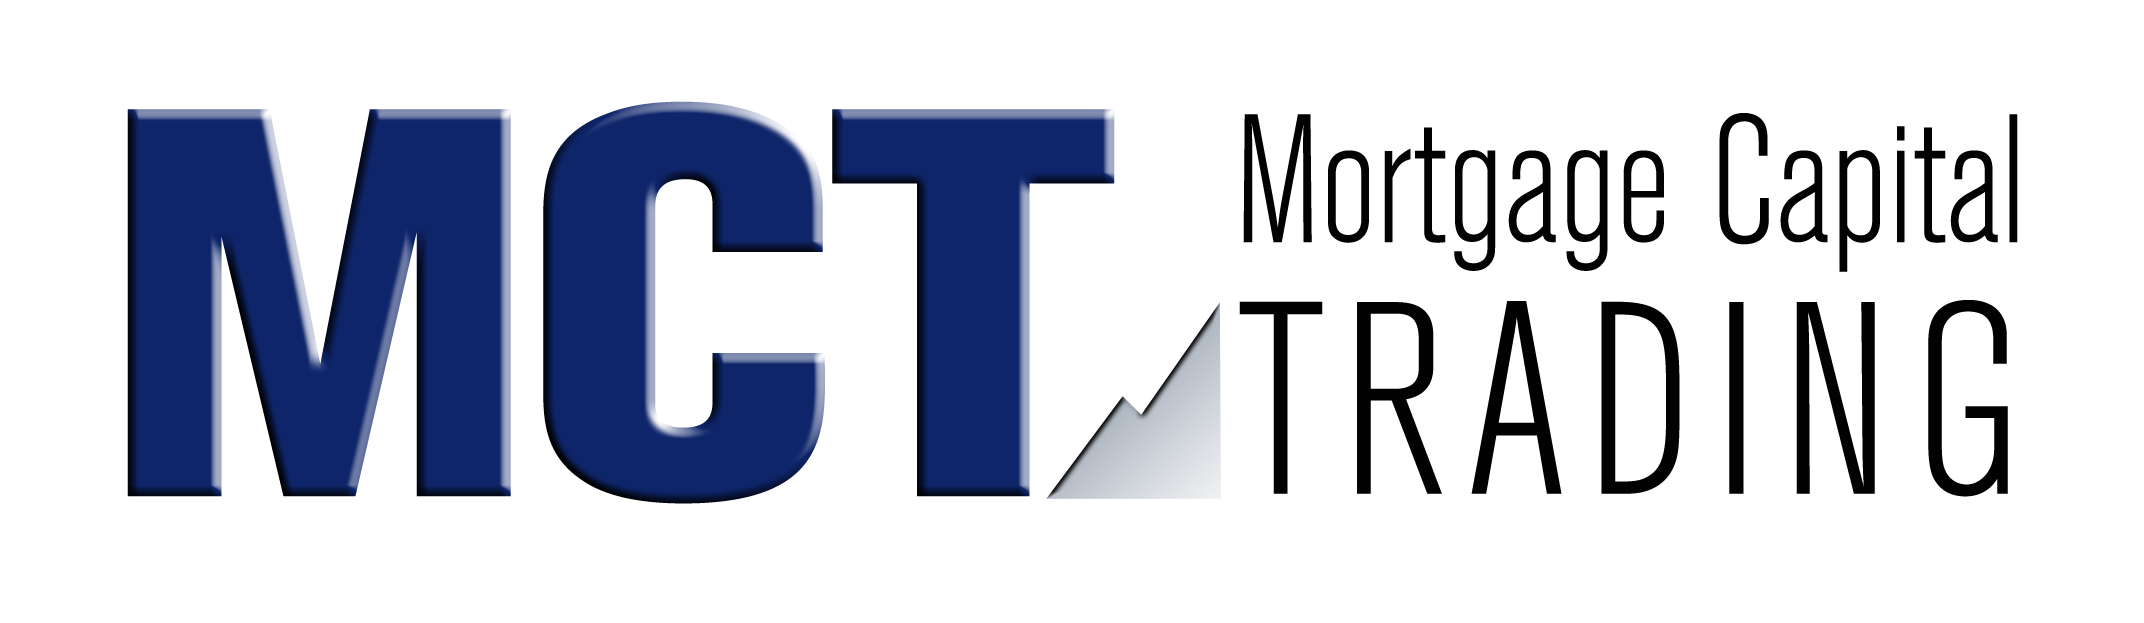 LendingQB and Mortgage Capital Trading (MCT) have announced an integration between the LendingQB loan origination platform and the new Bid Auction Manager (BAM) technology within the MCTlive! secondary marketing software platform